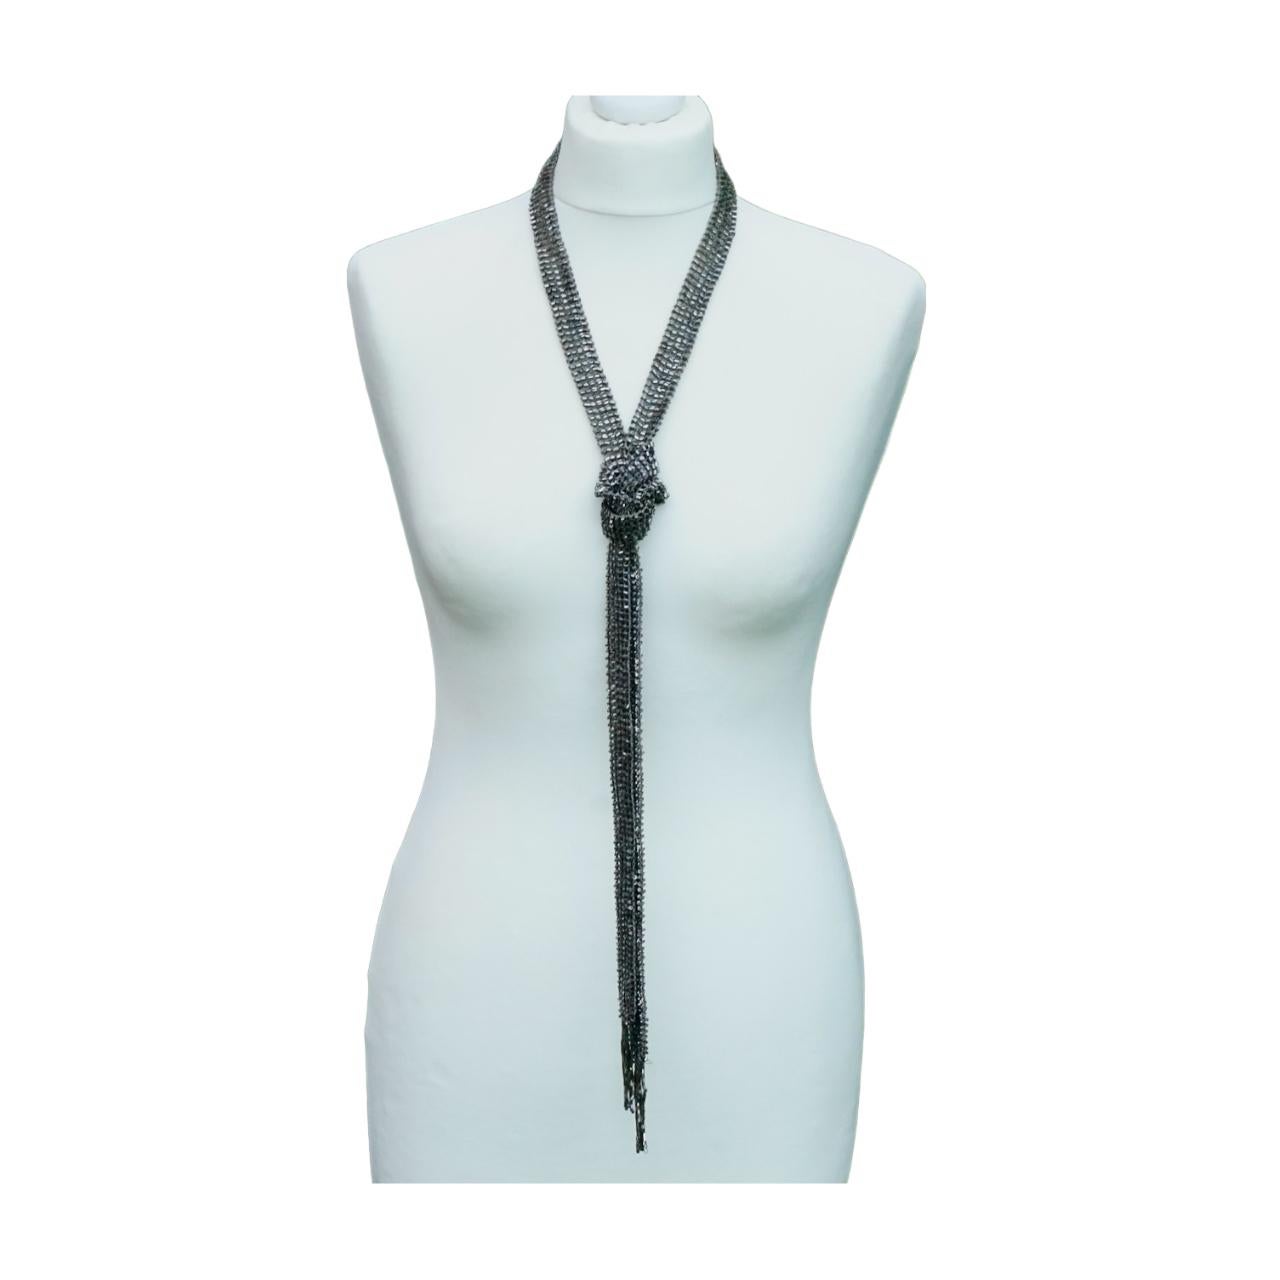 Art Deco Lariat Necklace or Belt with Silvery Glass Beads For Sale 2